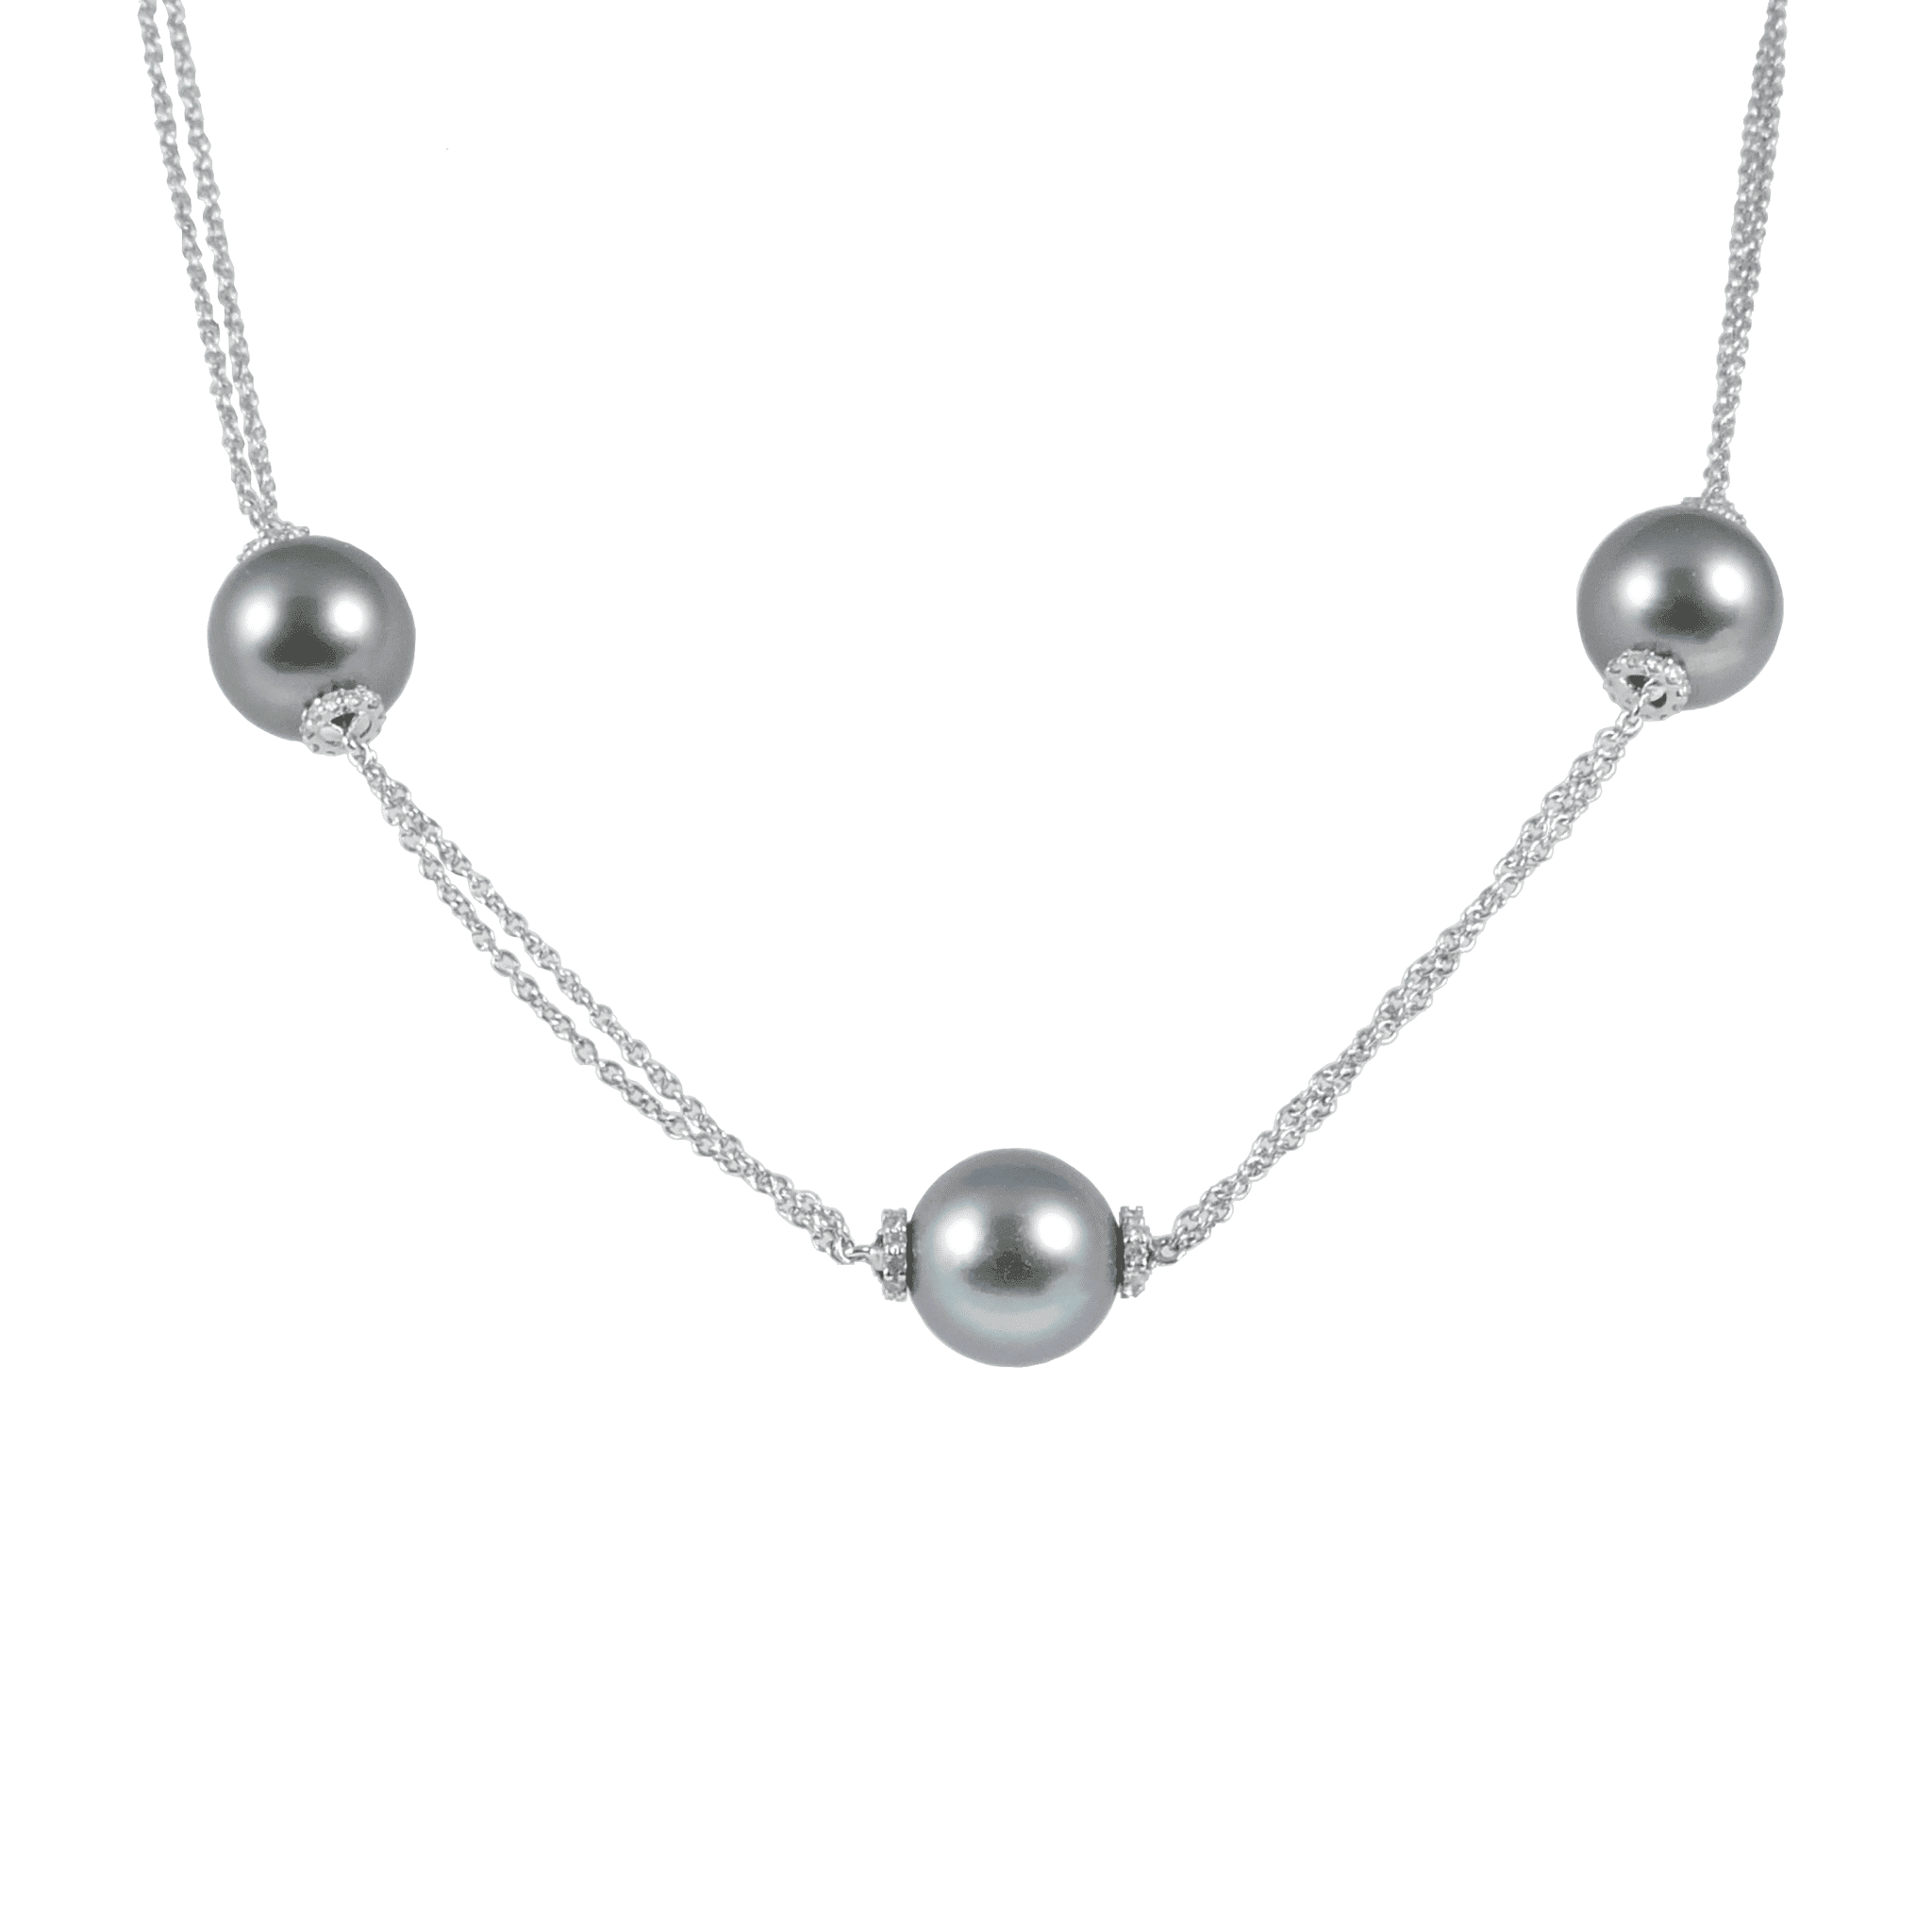 18ct White Gold Tahitian Pearl & Diamond Chain Necklace